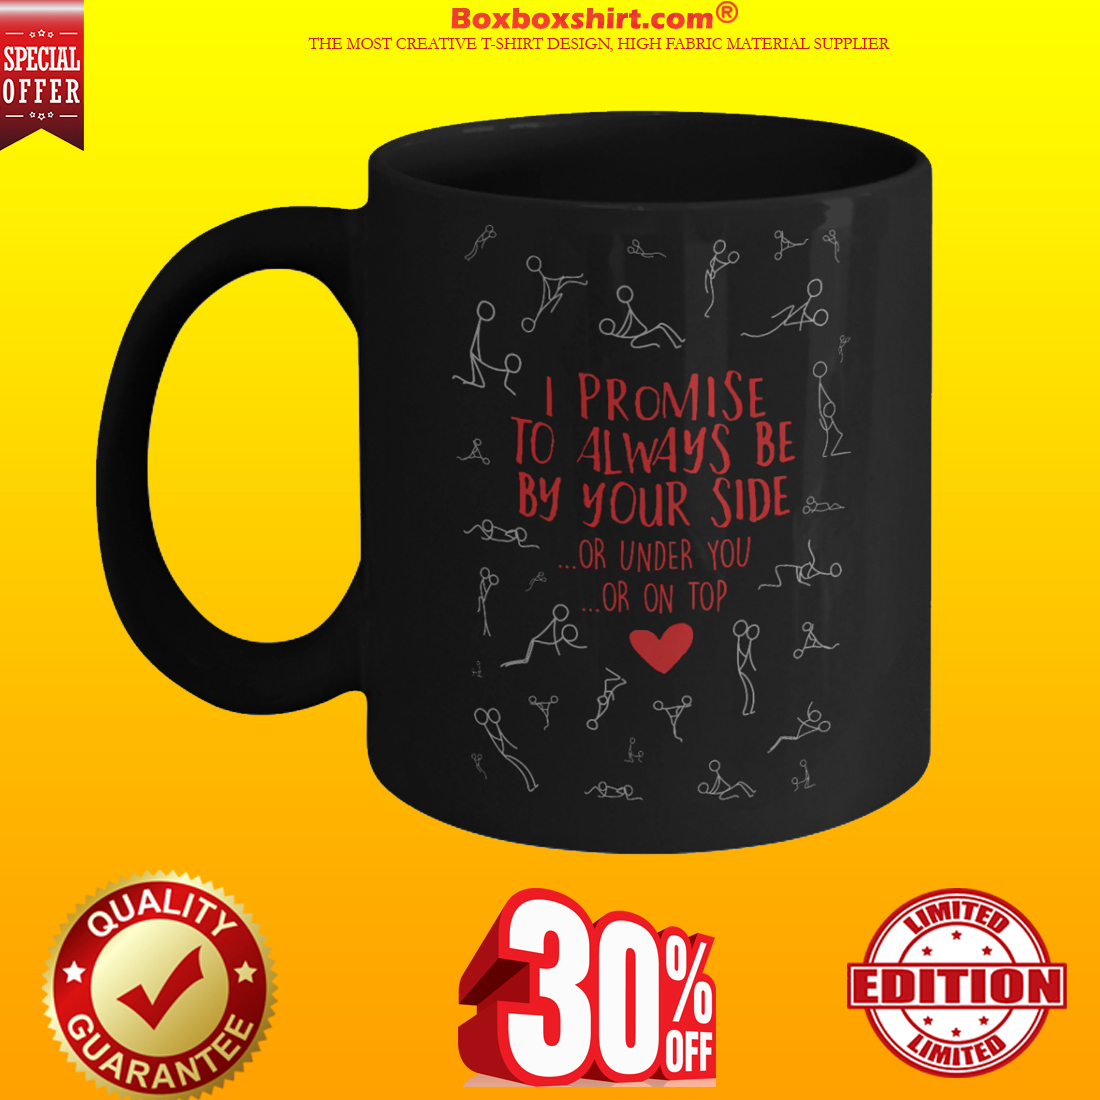 I promise to always be your side mug or under you or on top mug 2